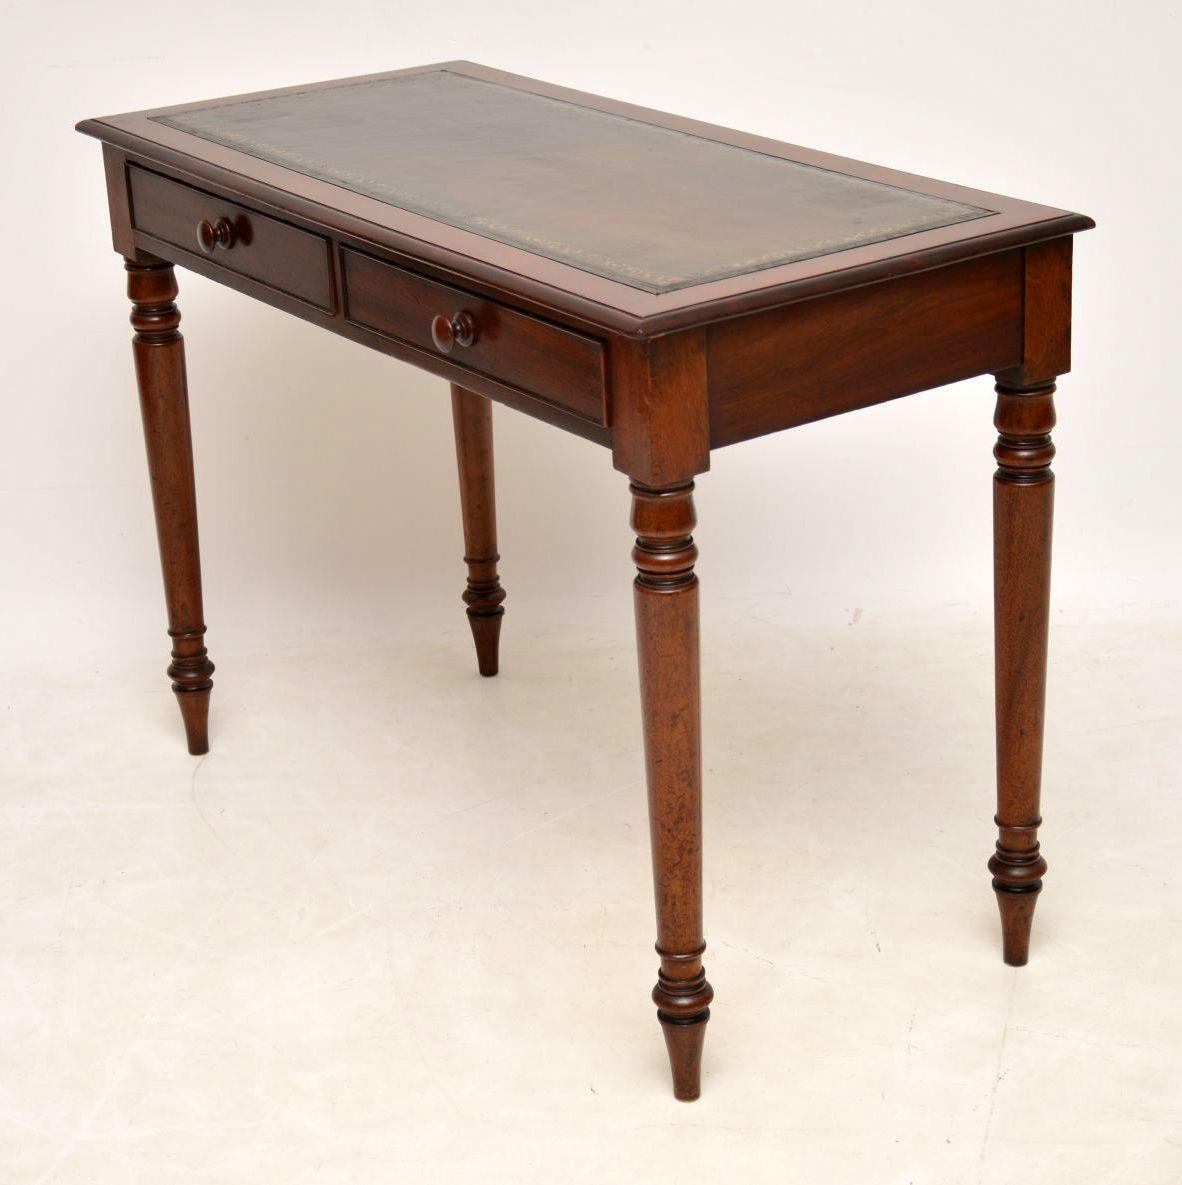 Antique Victorian Mahogany Leather Top Writing Table (Mittleres 19. Jahrhundert)